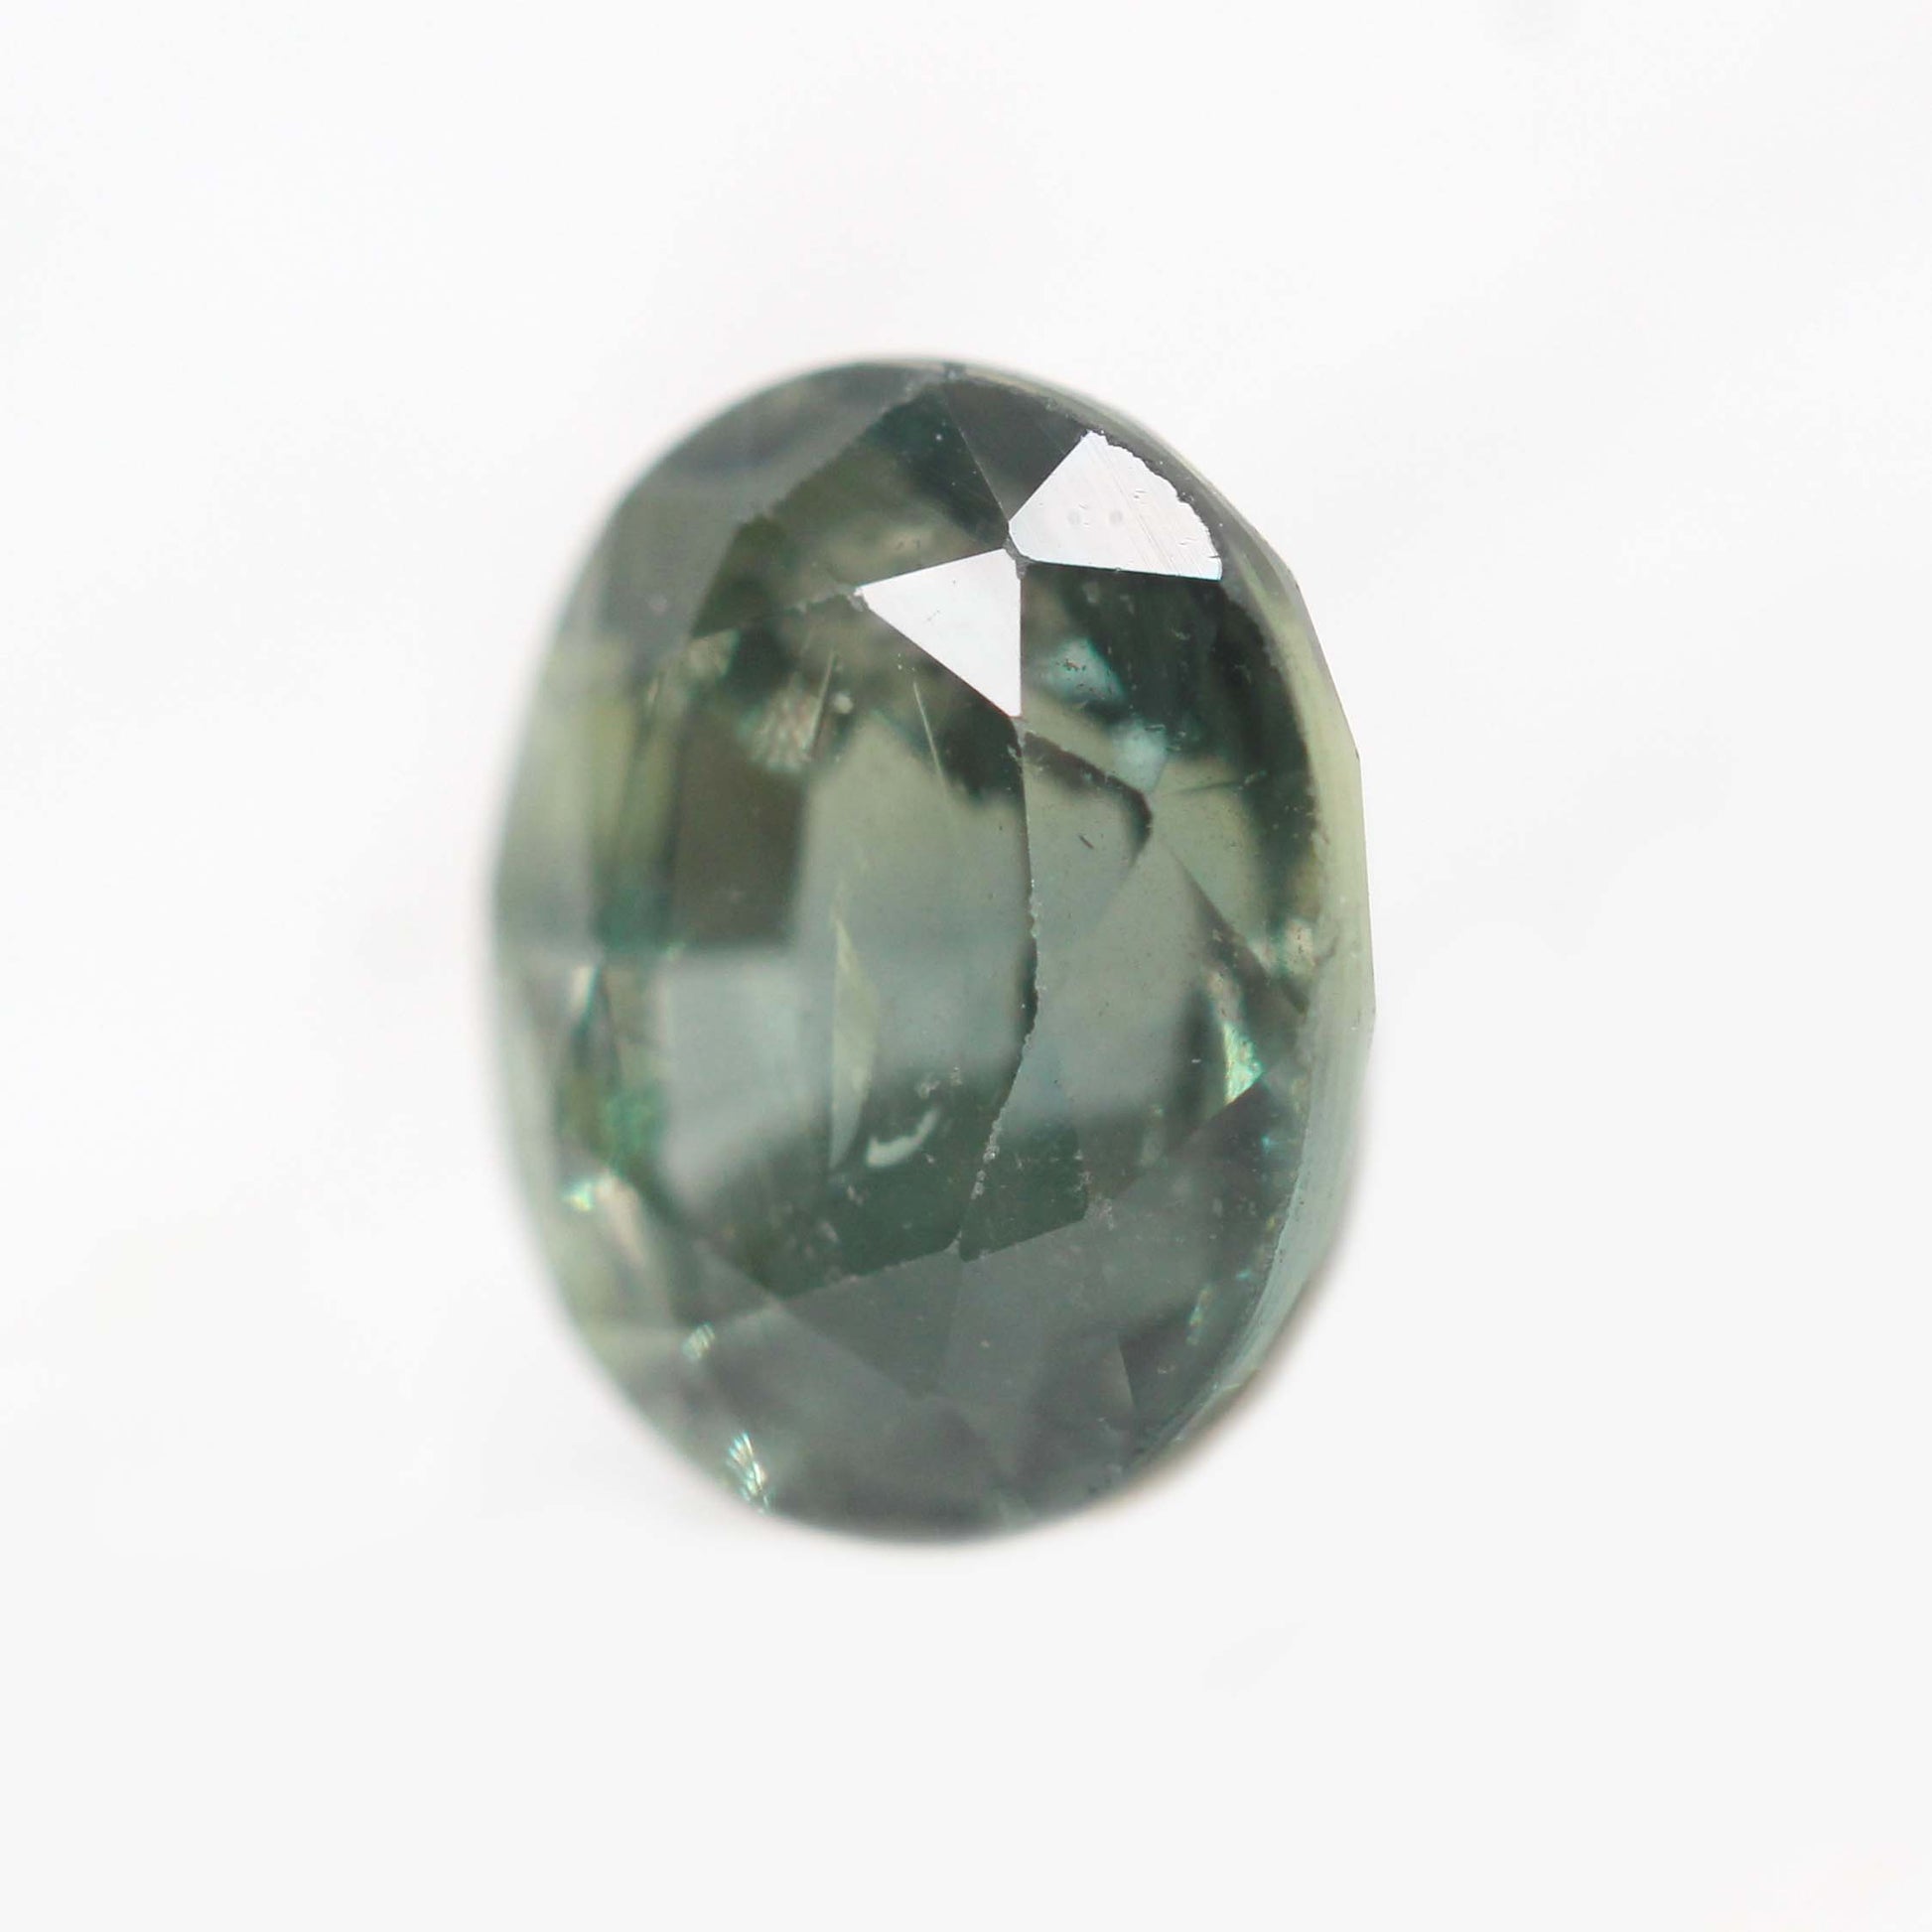 2.00 Carat Green Oval Sapphire for Custom Work - Inventory Code GOSAP200 - Midwinter Co. Alternative Bridal Rings and Modern Fine Jewelry